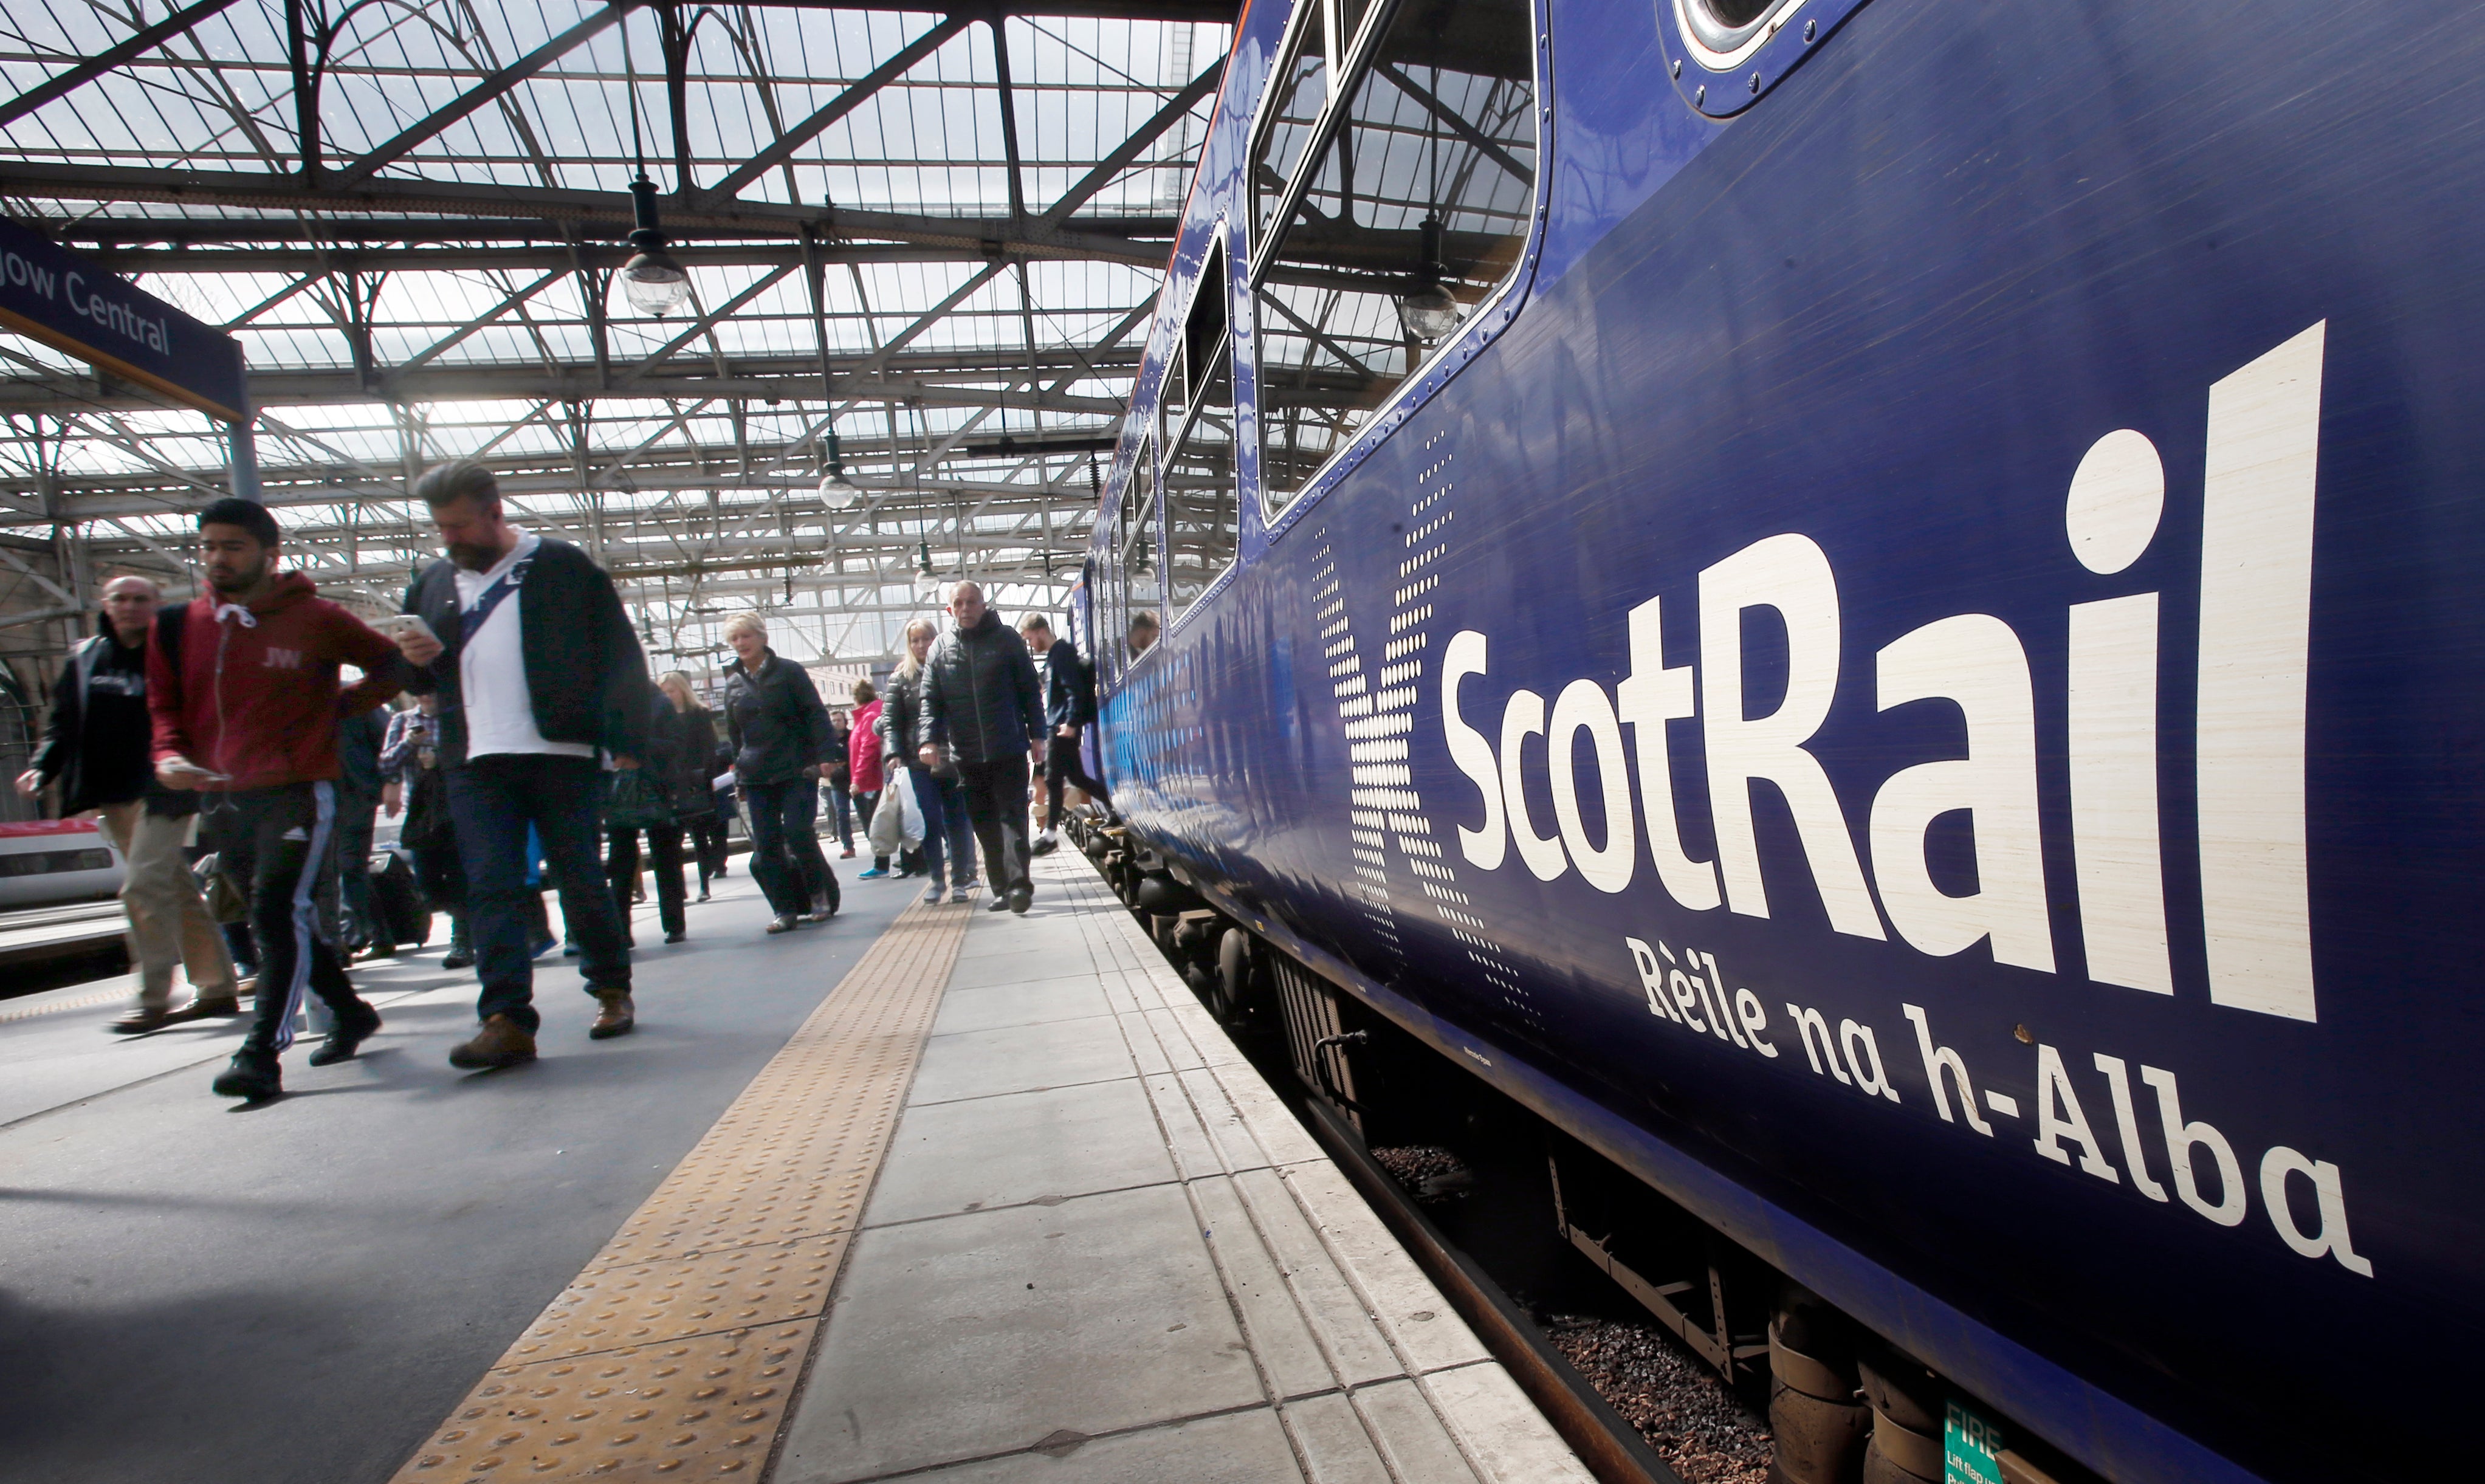 Services in the affected areas will end from 4pm on Wednesday, Scotrail has said (Danny Lawson/PA)